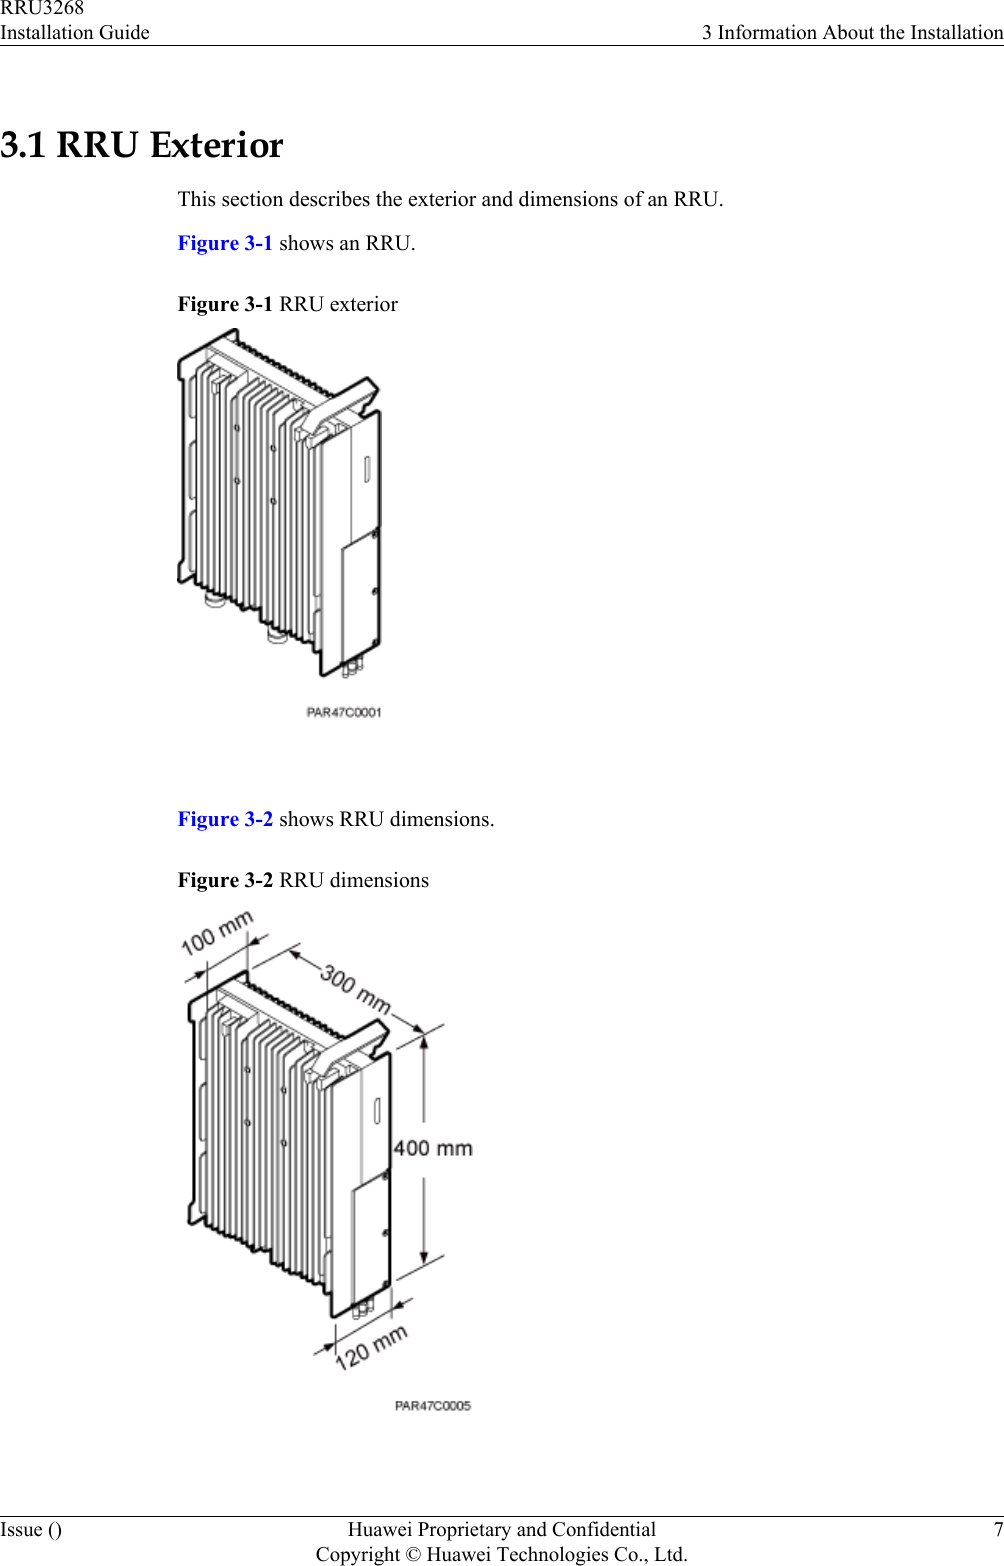 3.1 RRU ExteriorThis section describes the exterior and dimensions of an RRU.Figure 3-1 shows an RRU.Figure 3-1 RRU exterior Figure 3-2 shows RRU dimensions.Figure 3-2 RRU dimensions RRU3268Installation Guide 3 Information About the InstallationIssue () Huawei Proprietary and ConfidentialCopyright © Huawei Technologies Co., Ltd.7